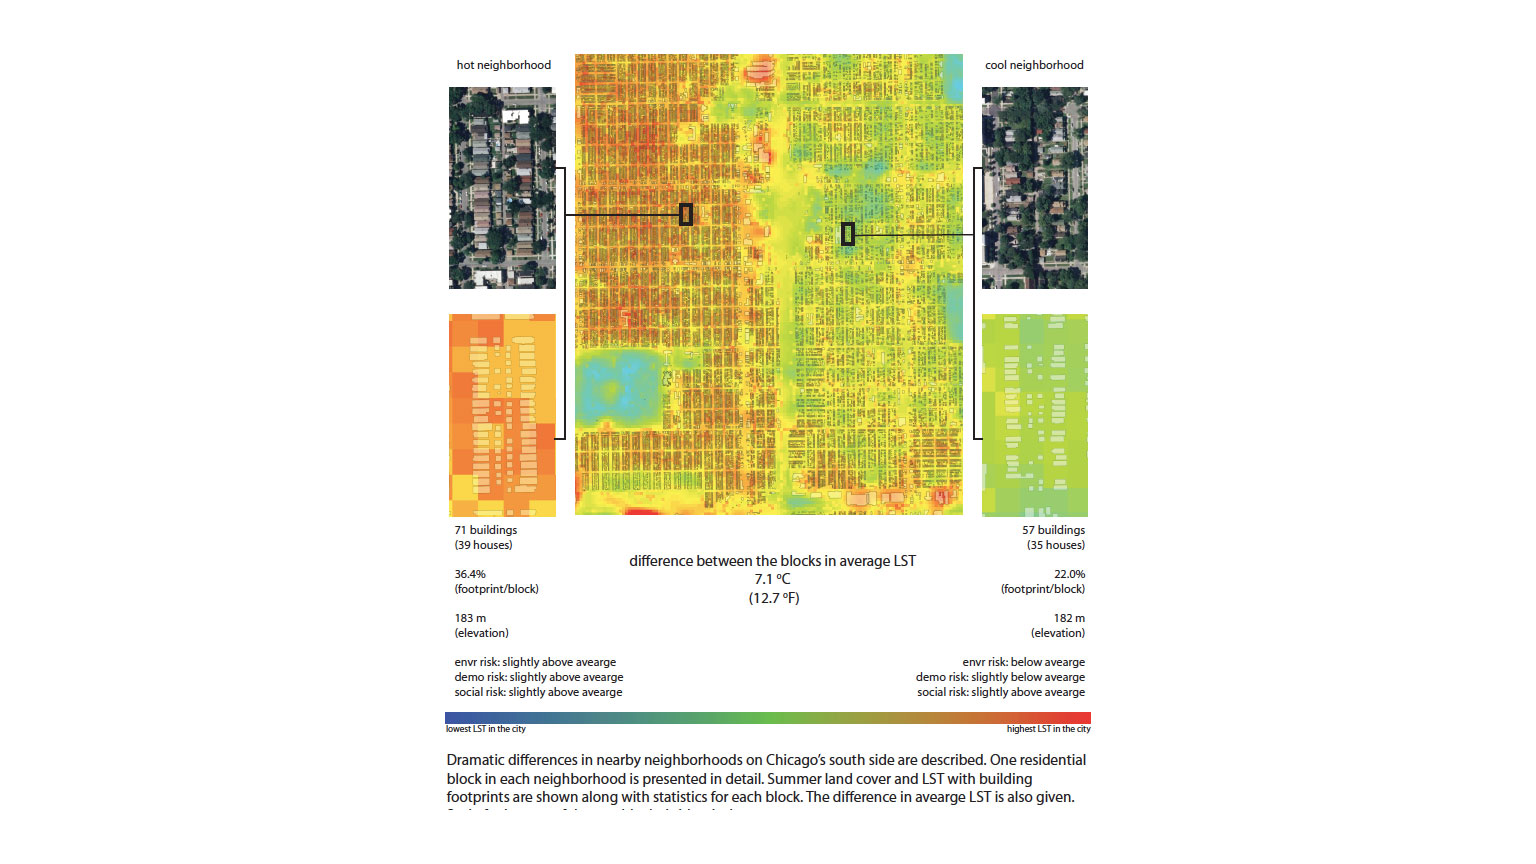 Heat map of a neighborhood comparing heat influenced by physical design.